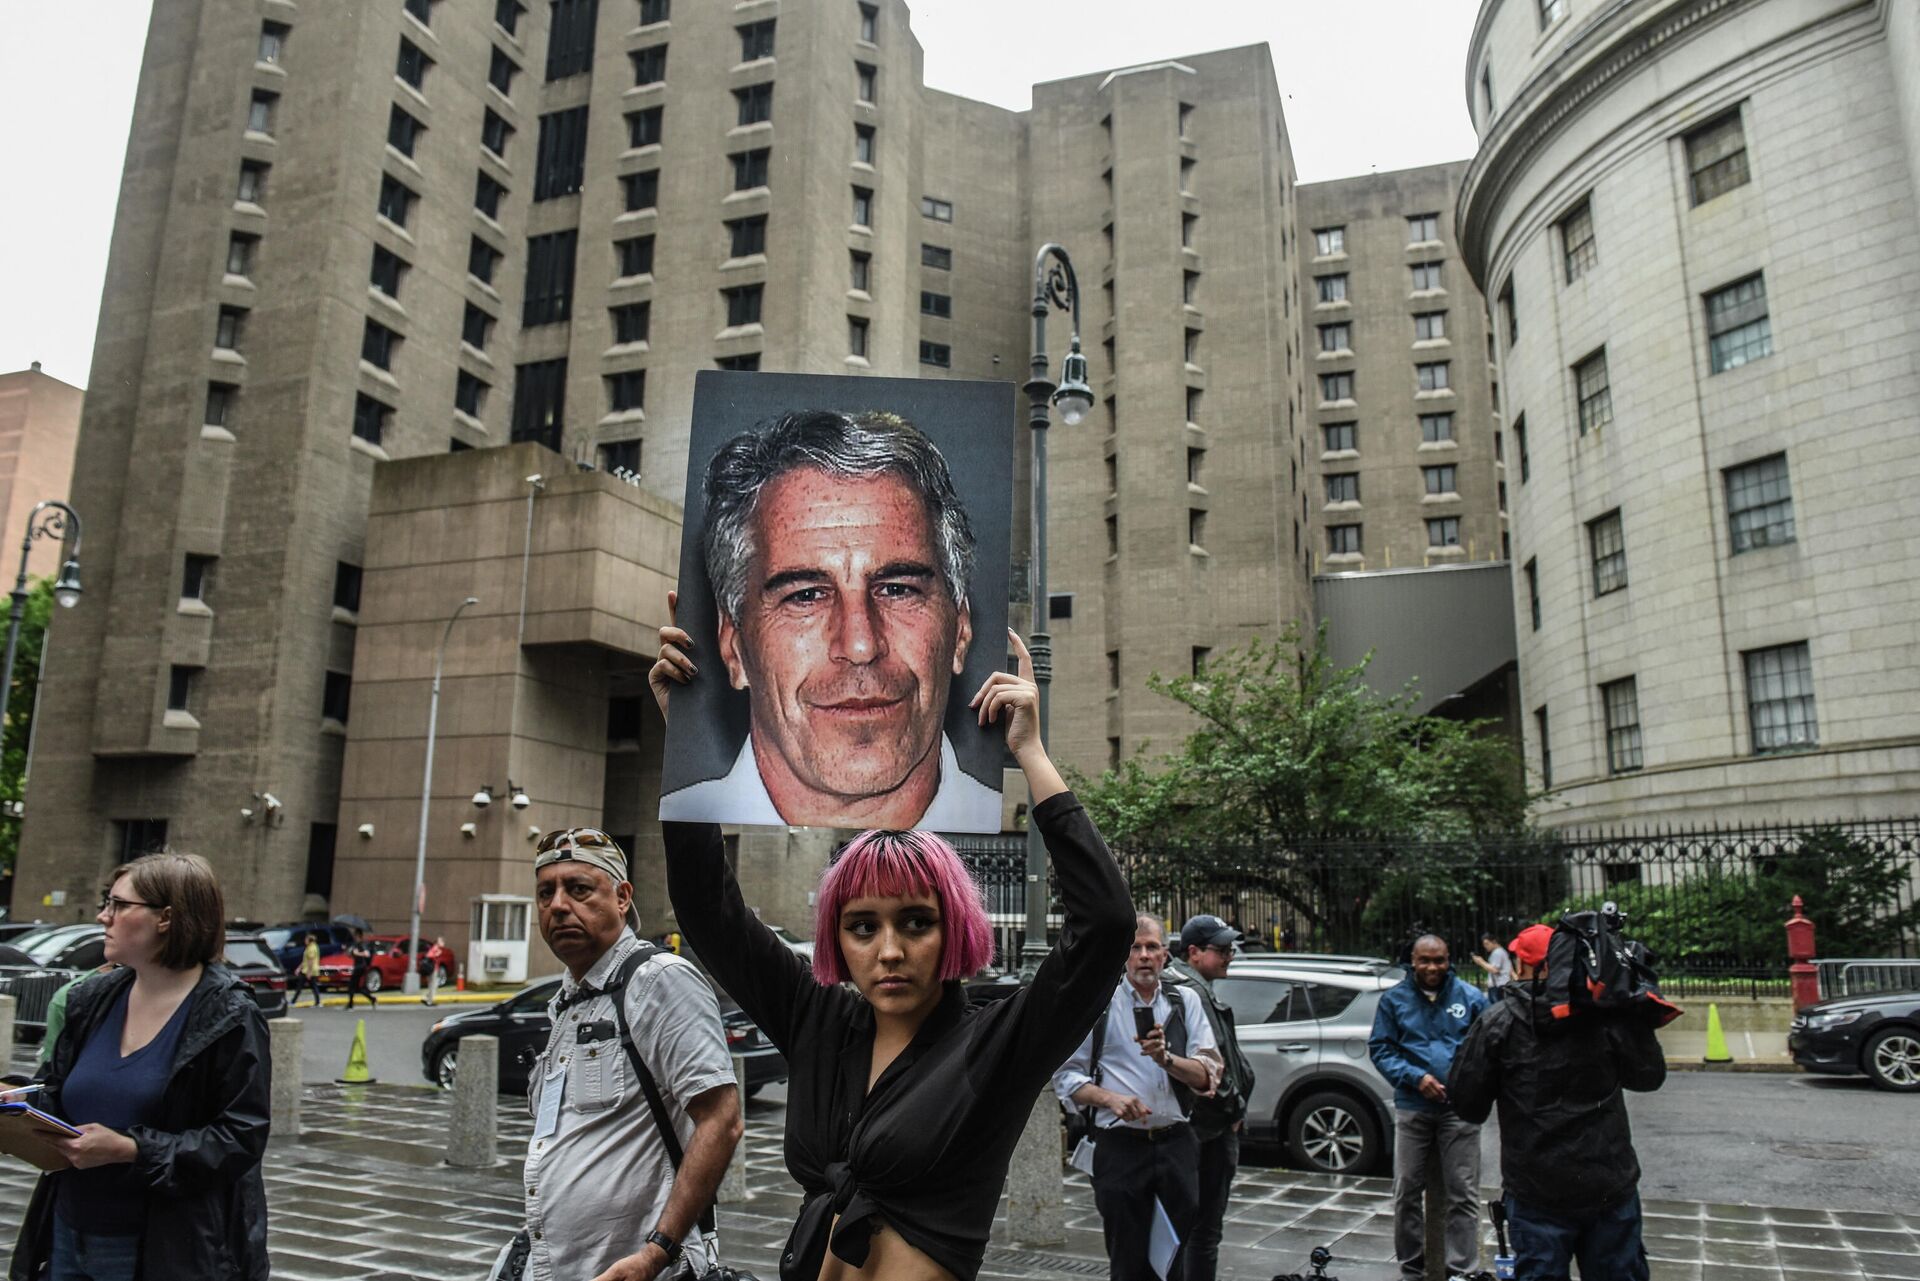 A member of a protest group called Hot Mess holds up a sign of Jeffrey Epstein in front of the Metropolitan Correction Center on July 8, 2019 in New York City. - Sputnik International, 1920, 01.11.2021